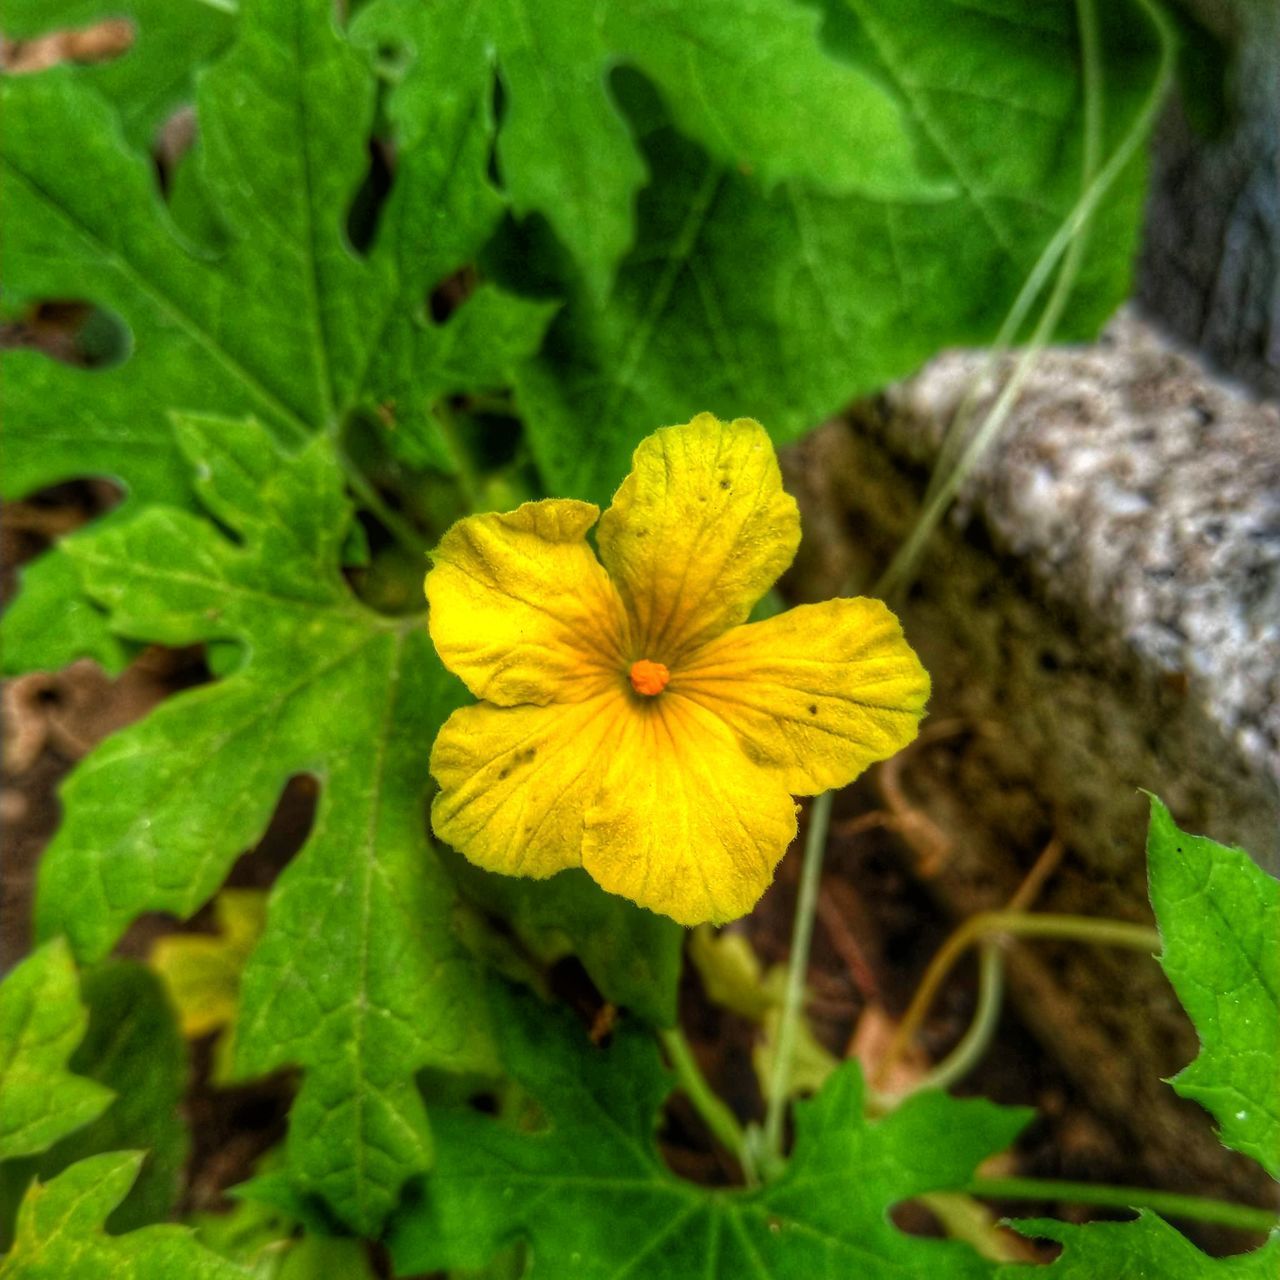 CLOSE-UP OF YELLOW FLOWER ON PLANT